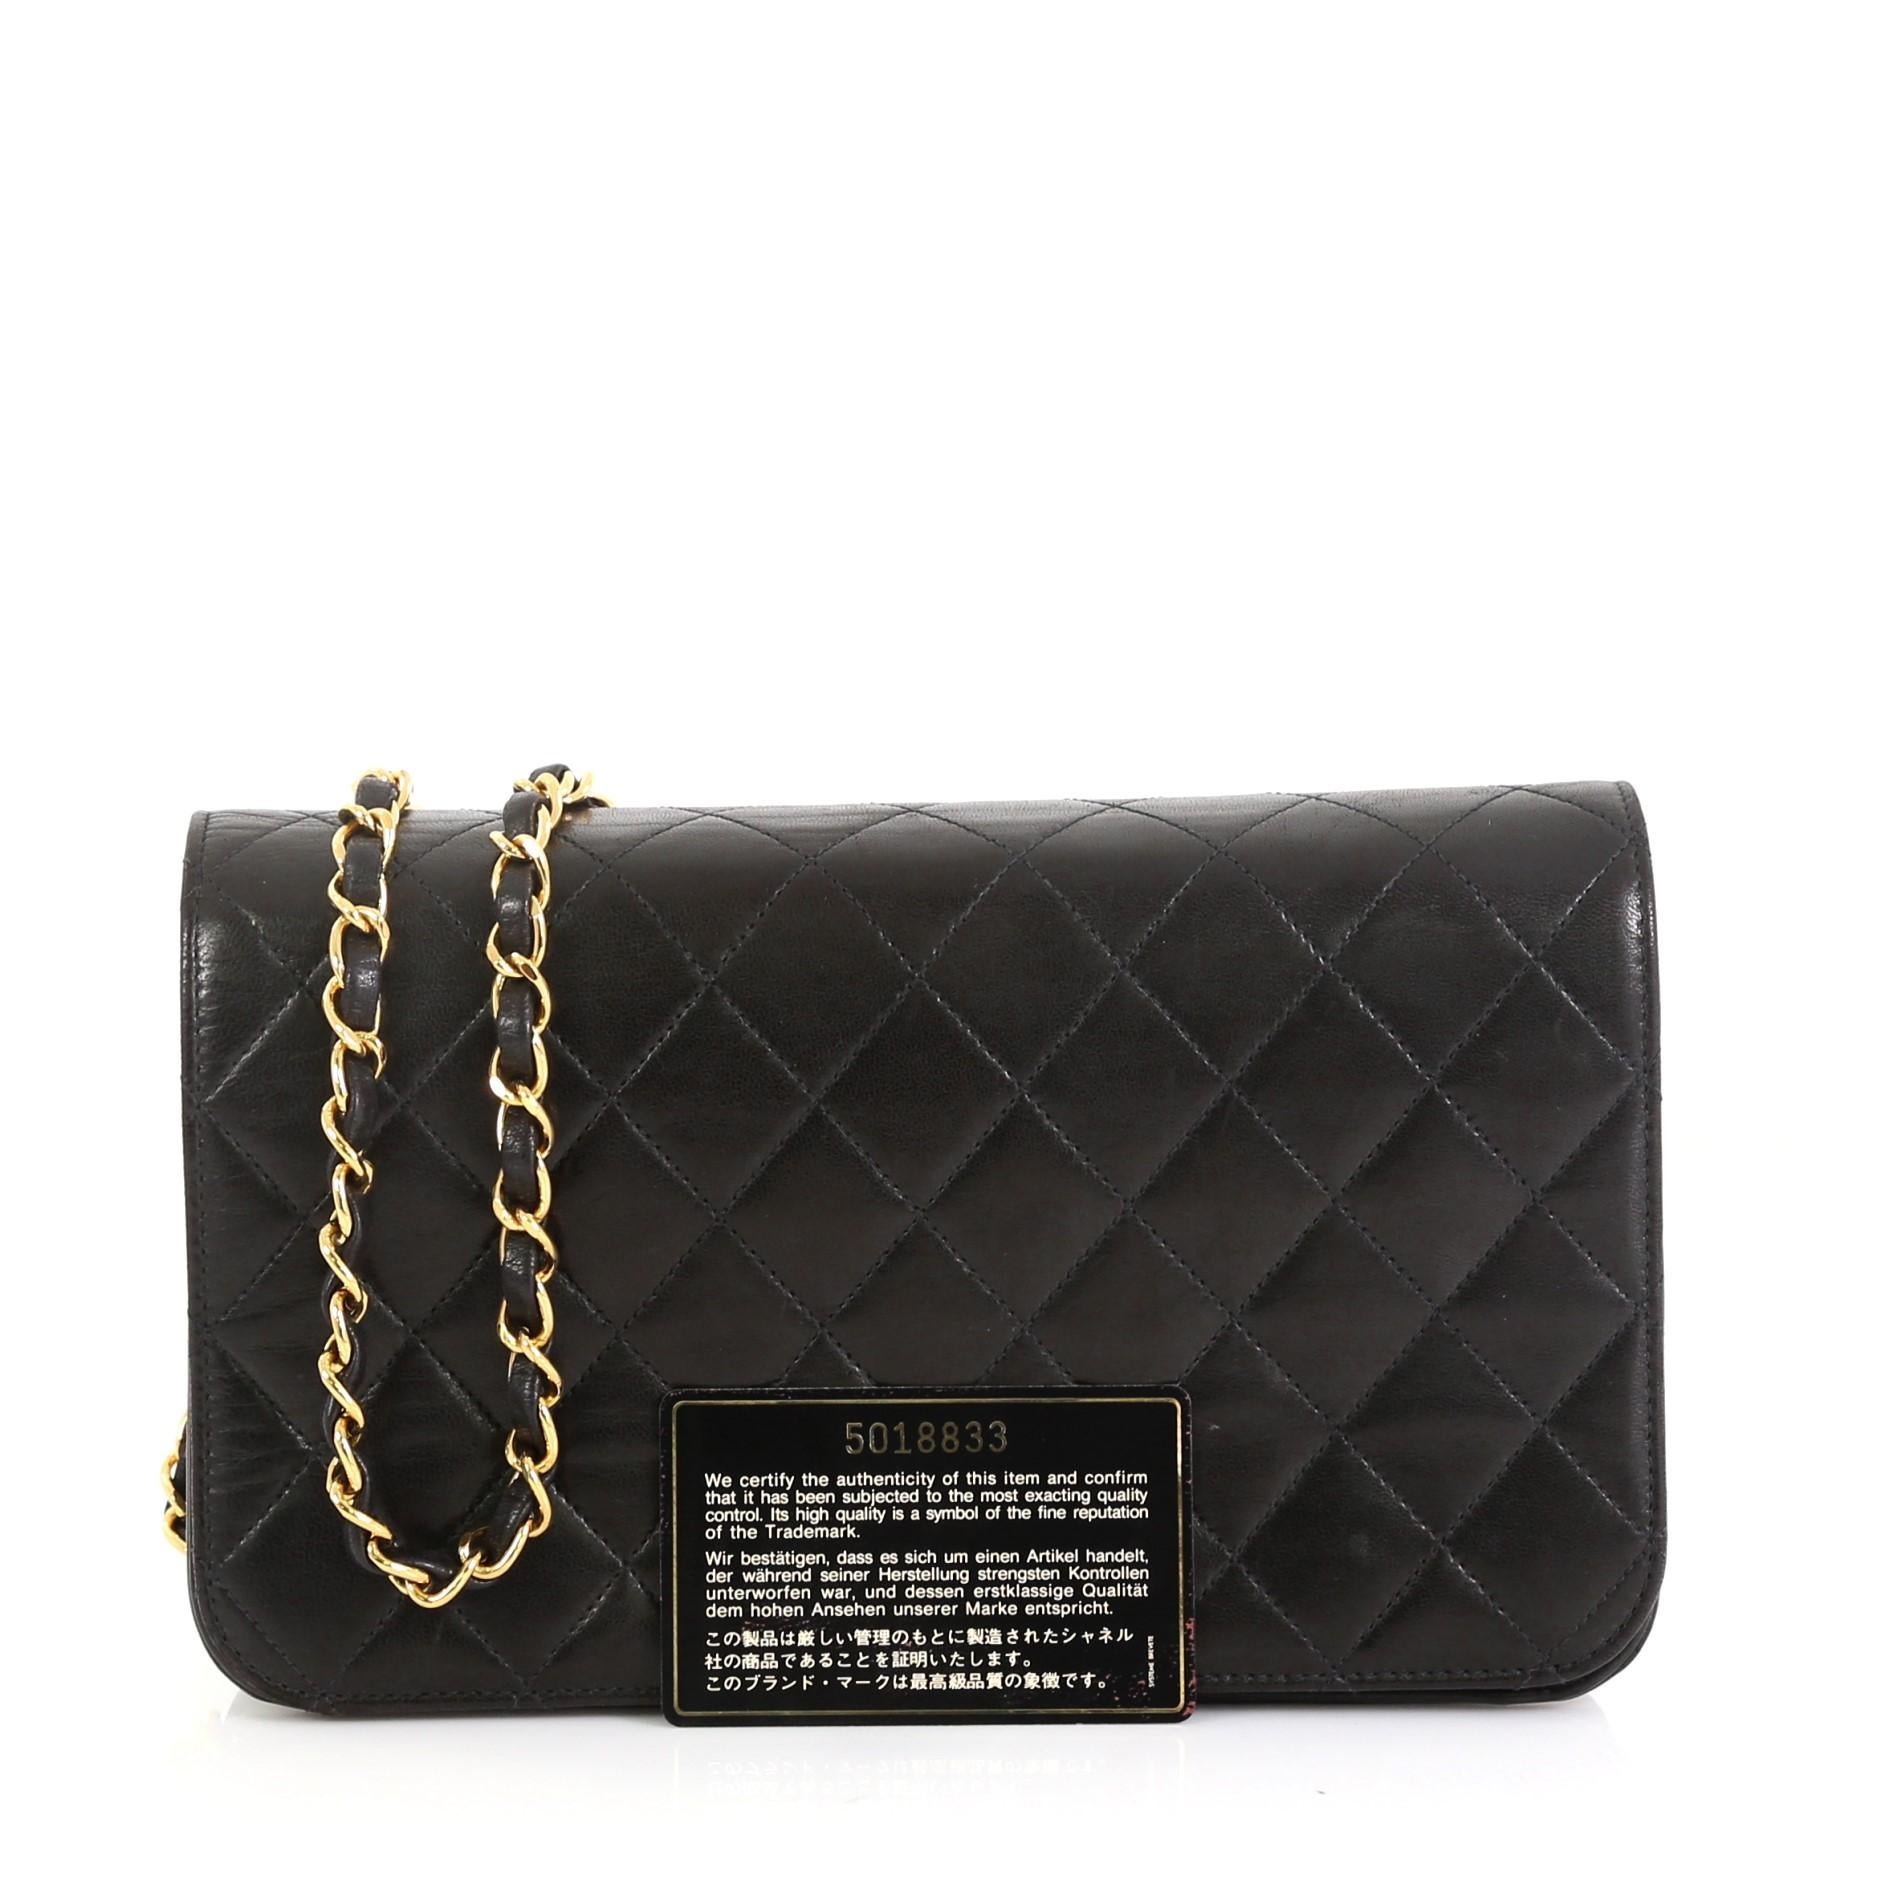 This Chanel Vintage 3 Way Full Flap Bag Quilted Lambskin Small, crafted in black quilted lambskin leather, features woven-in leather chain strap and gold-tone hardware. Its CC turn-lock closure opens to a red leather interior with zip pocket.